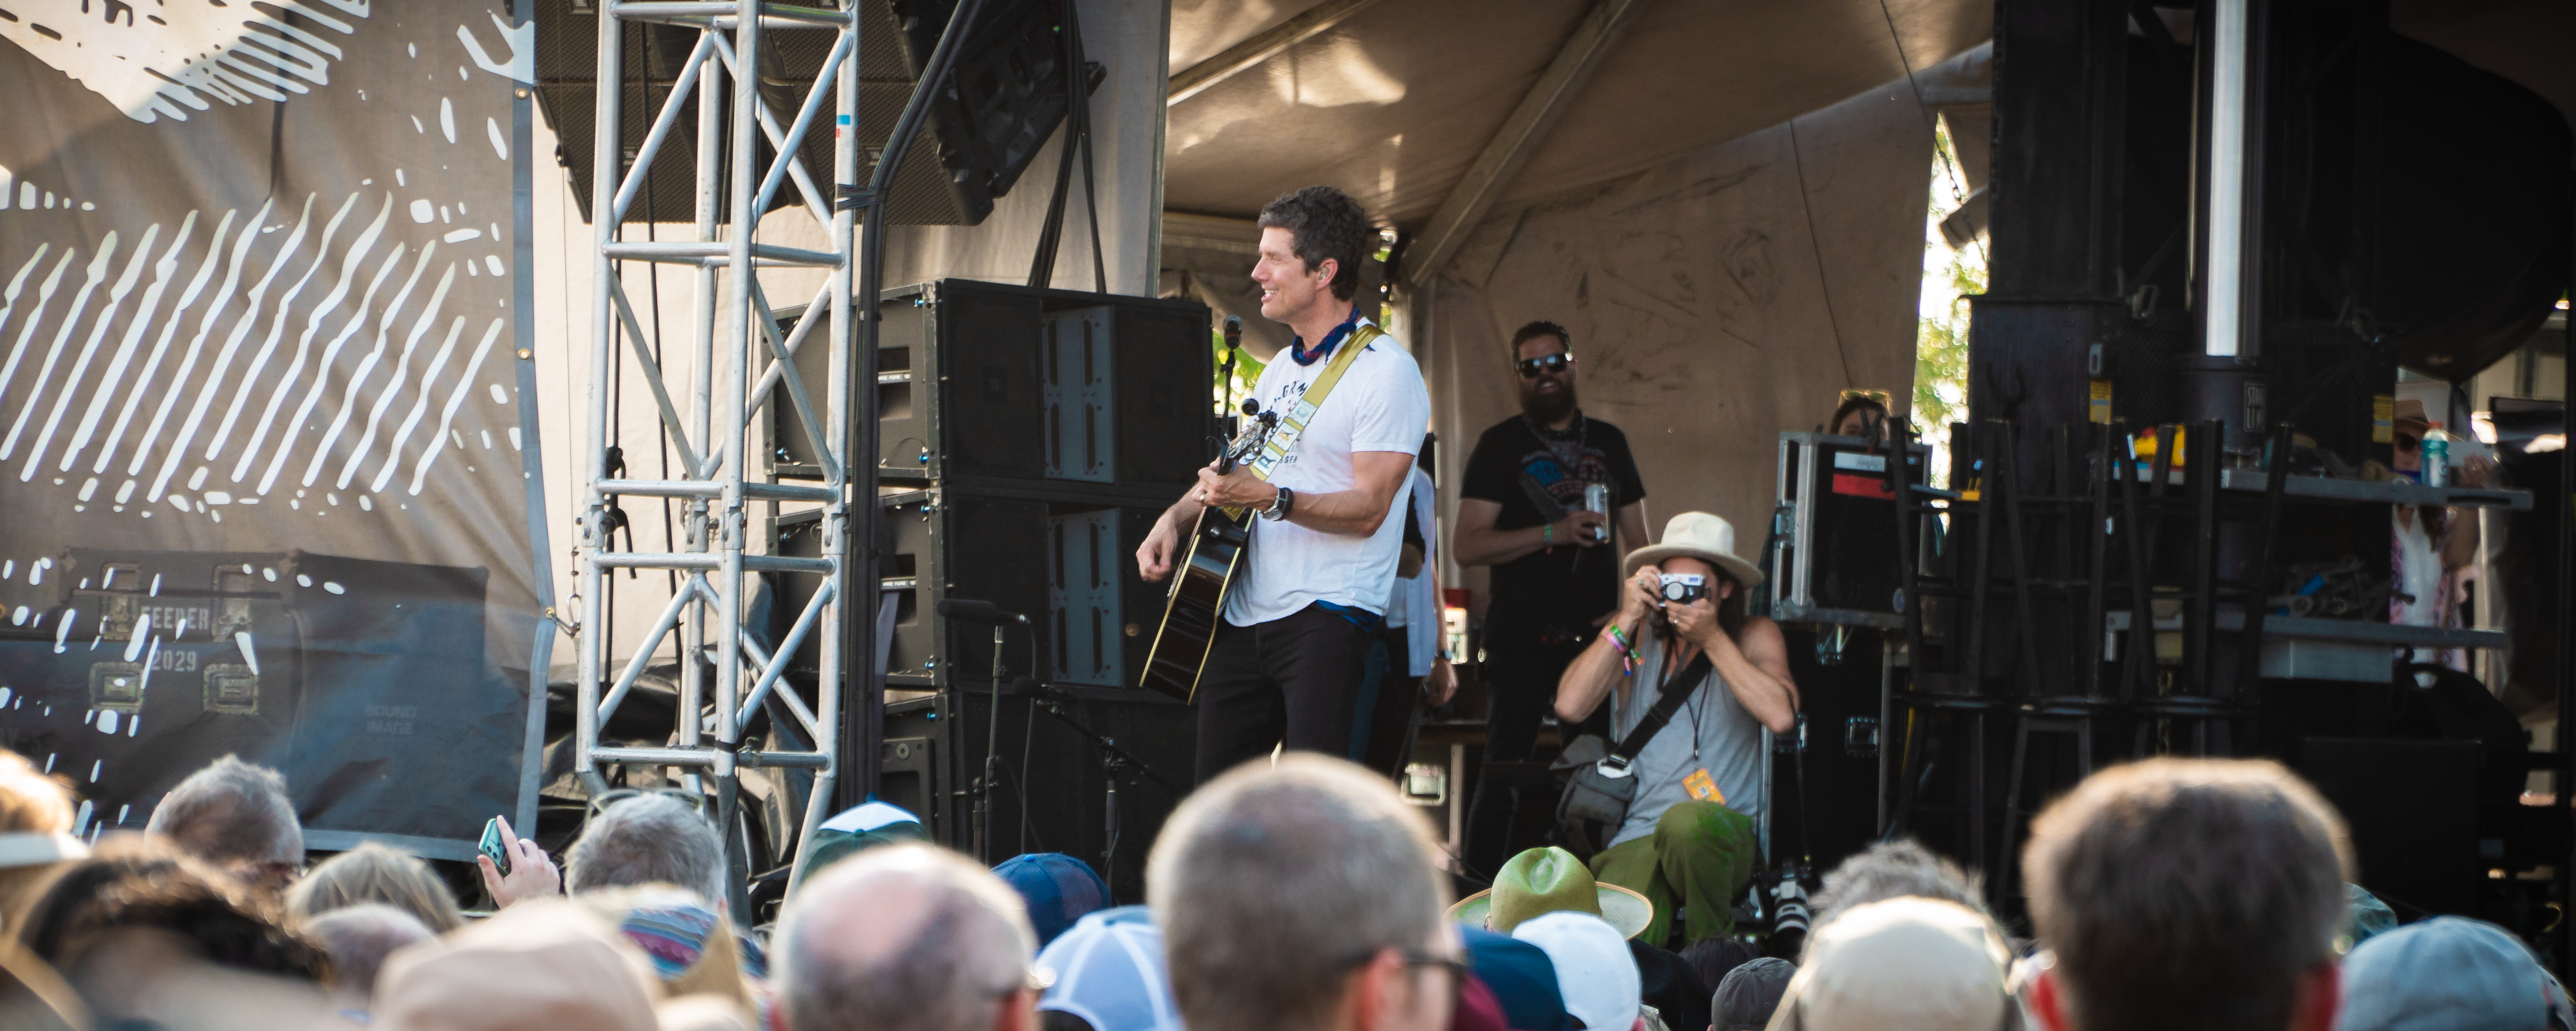 Pilgrimage 2022: Better Than Ezra—“Just Don’t Quit, You’ll Have Your Moment”